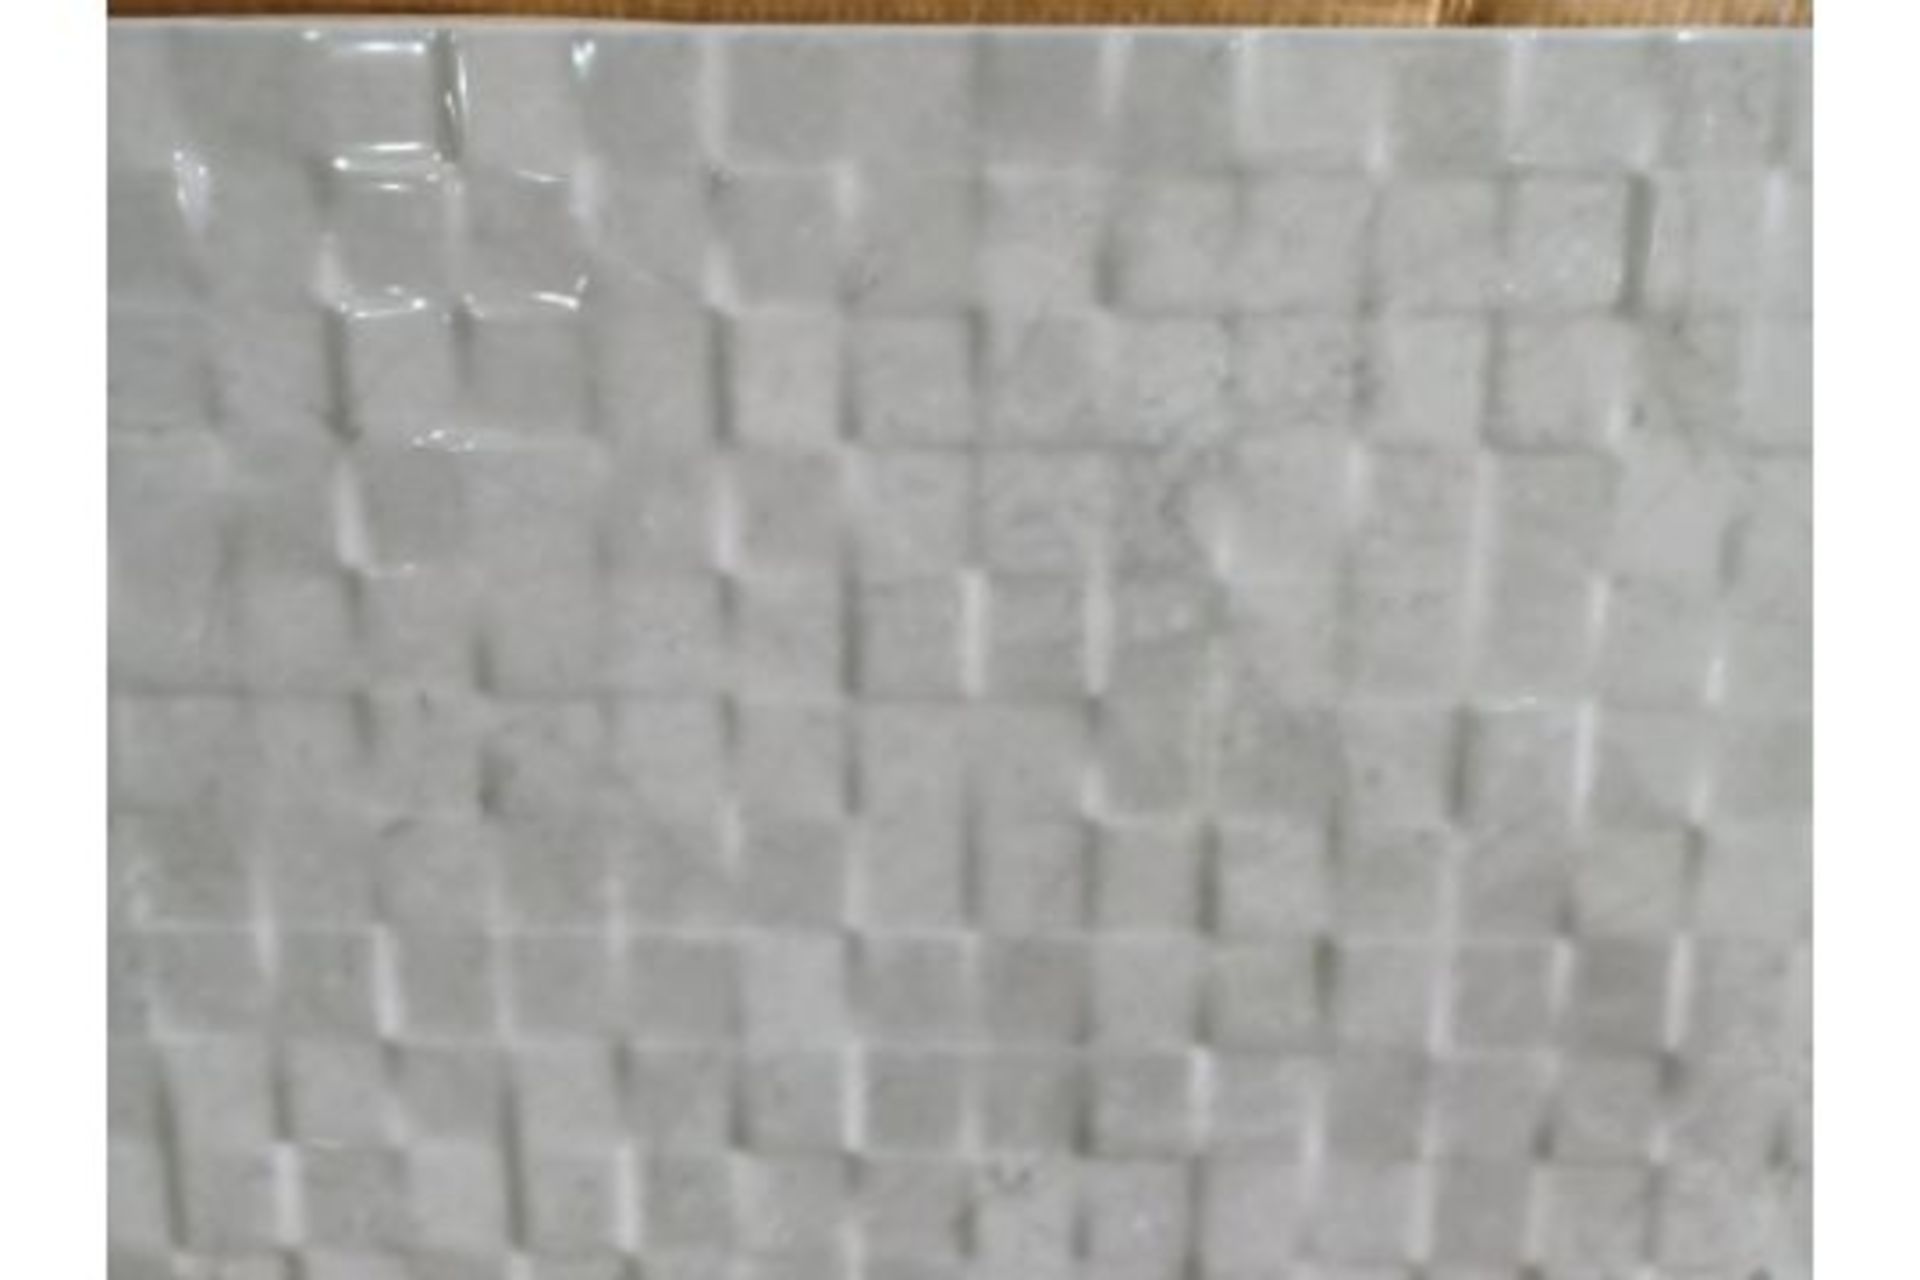 12 x PACKS OF IDEAL MARBLE DÉCOR GLAZED CERAMIC WALL TILES. SIZE: 400mm(L) x 250mm (H). 7.5mm THICK. - Image 2 of 2